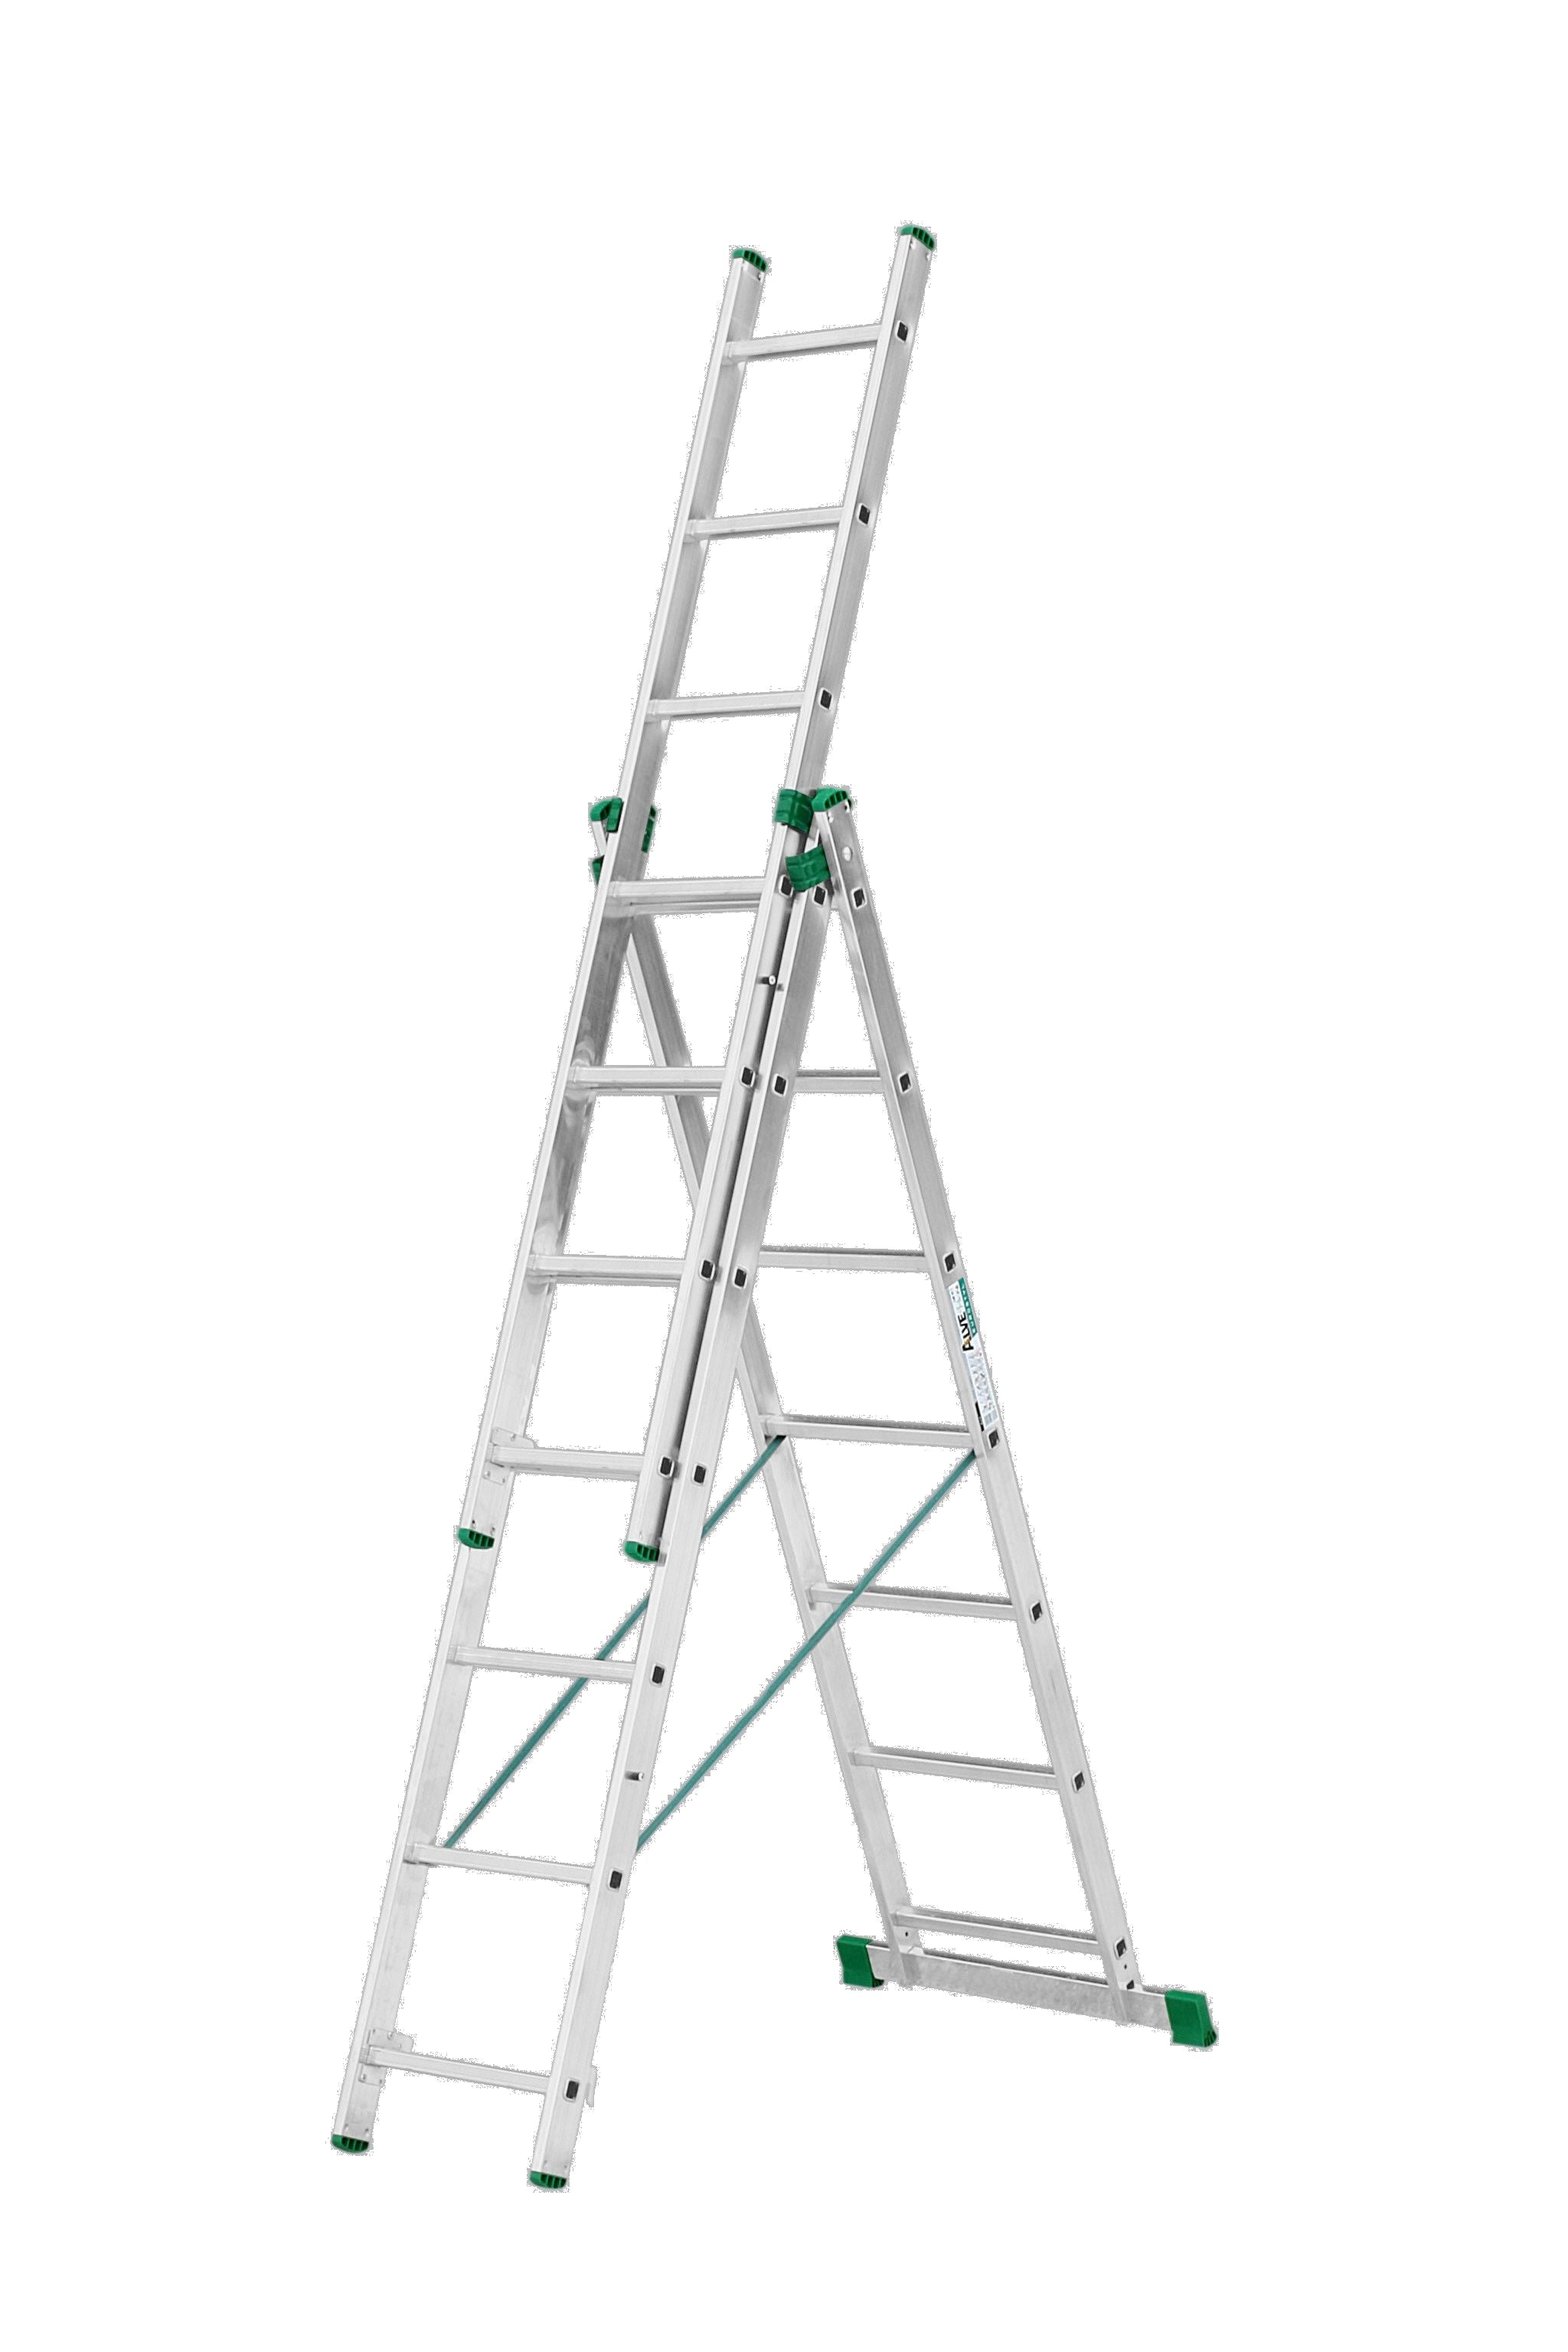 TRIPLE SECTION LADDERS